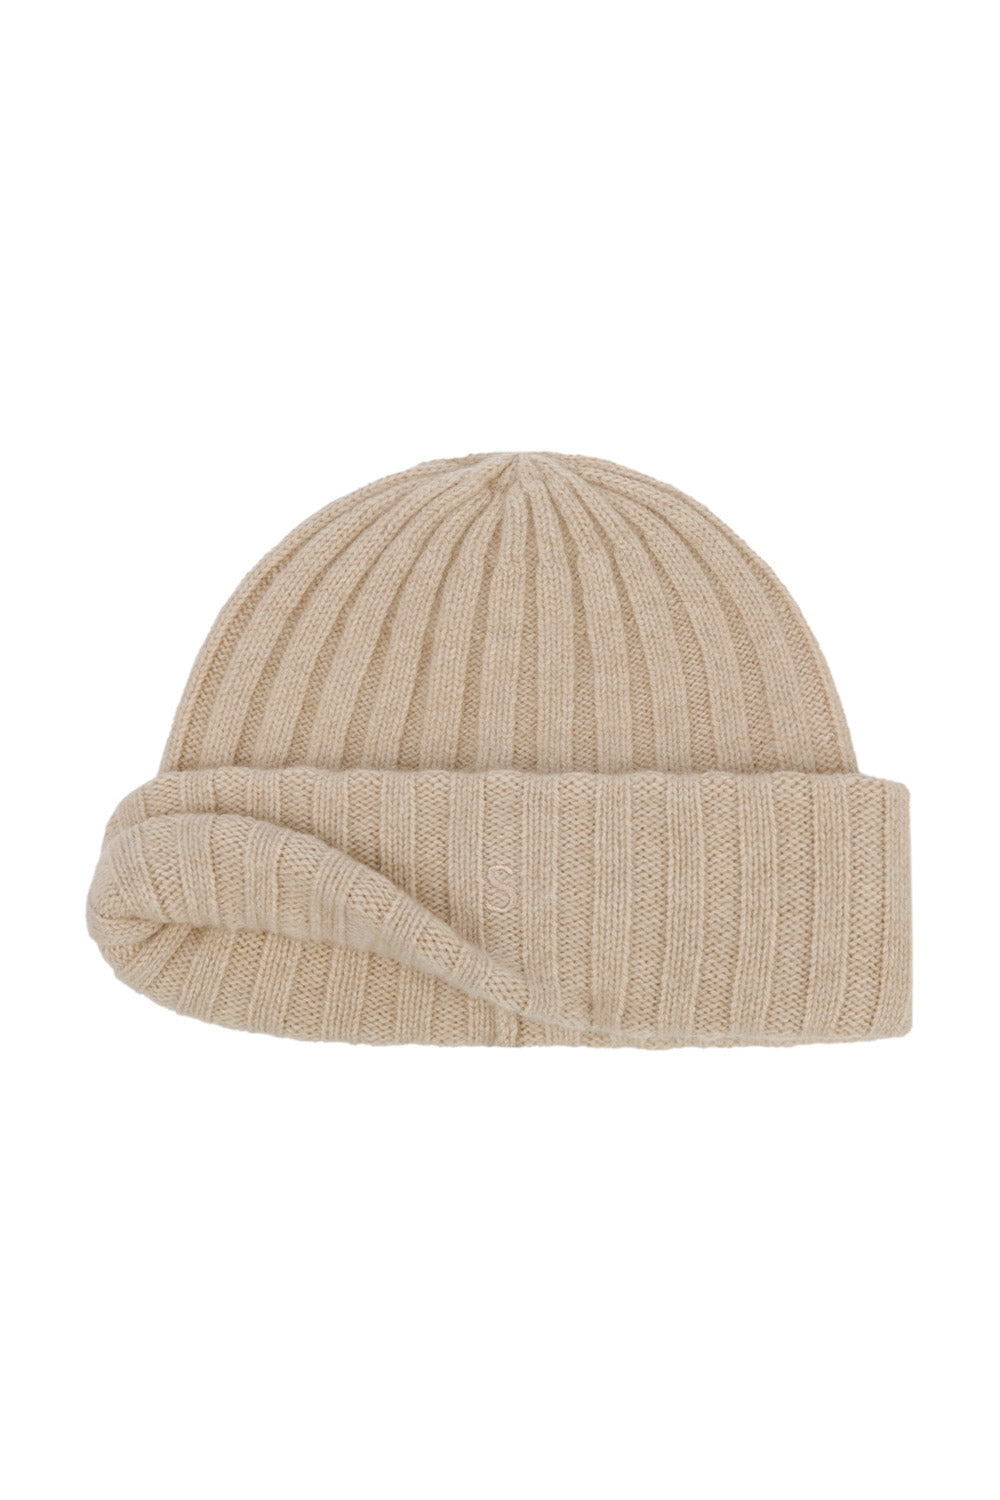 Buy the Stetson Undyed Sustainable Cashmere Beanie in Beige at Intro. Spend £50 for free UK delivery. Official stockists. We ship worldwide.